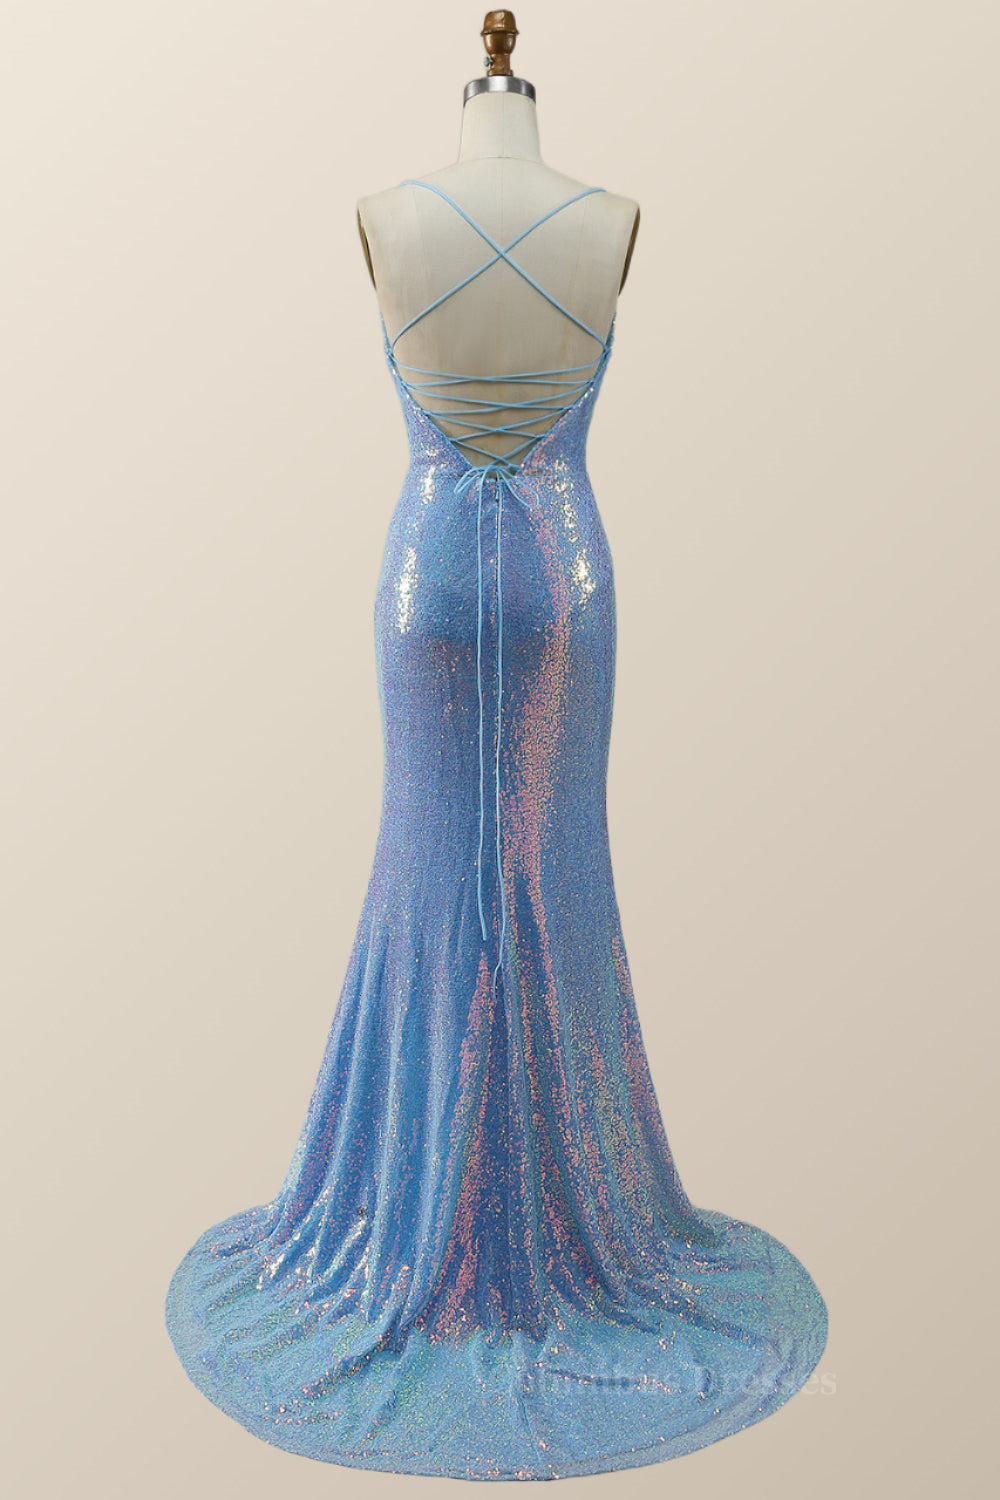 Party Dress Quotesparty Dresses Wedding, Spaghetti Straps Blue Sequin Mermaid Draped Dress